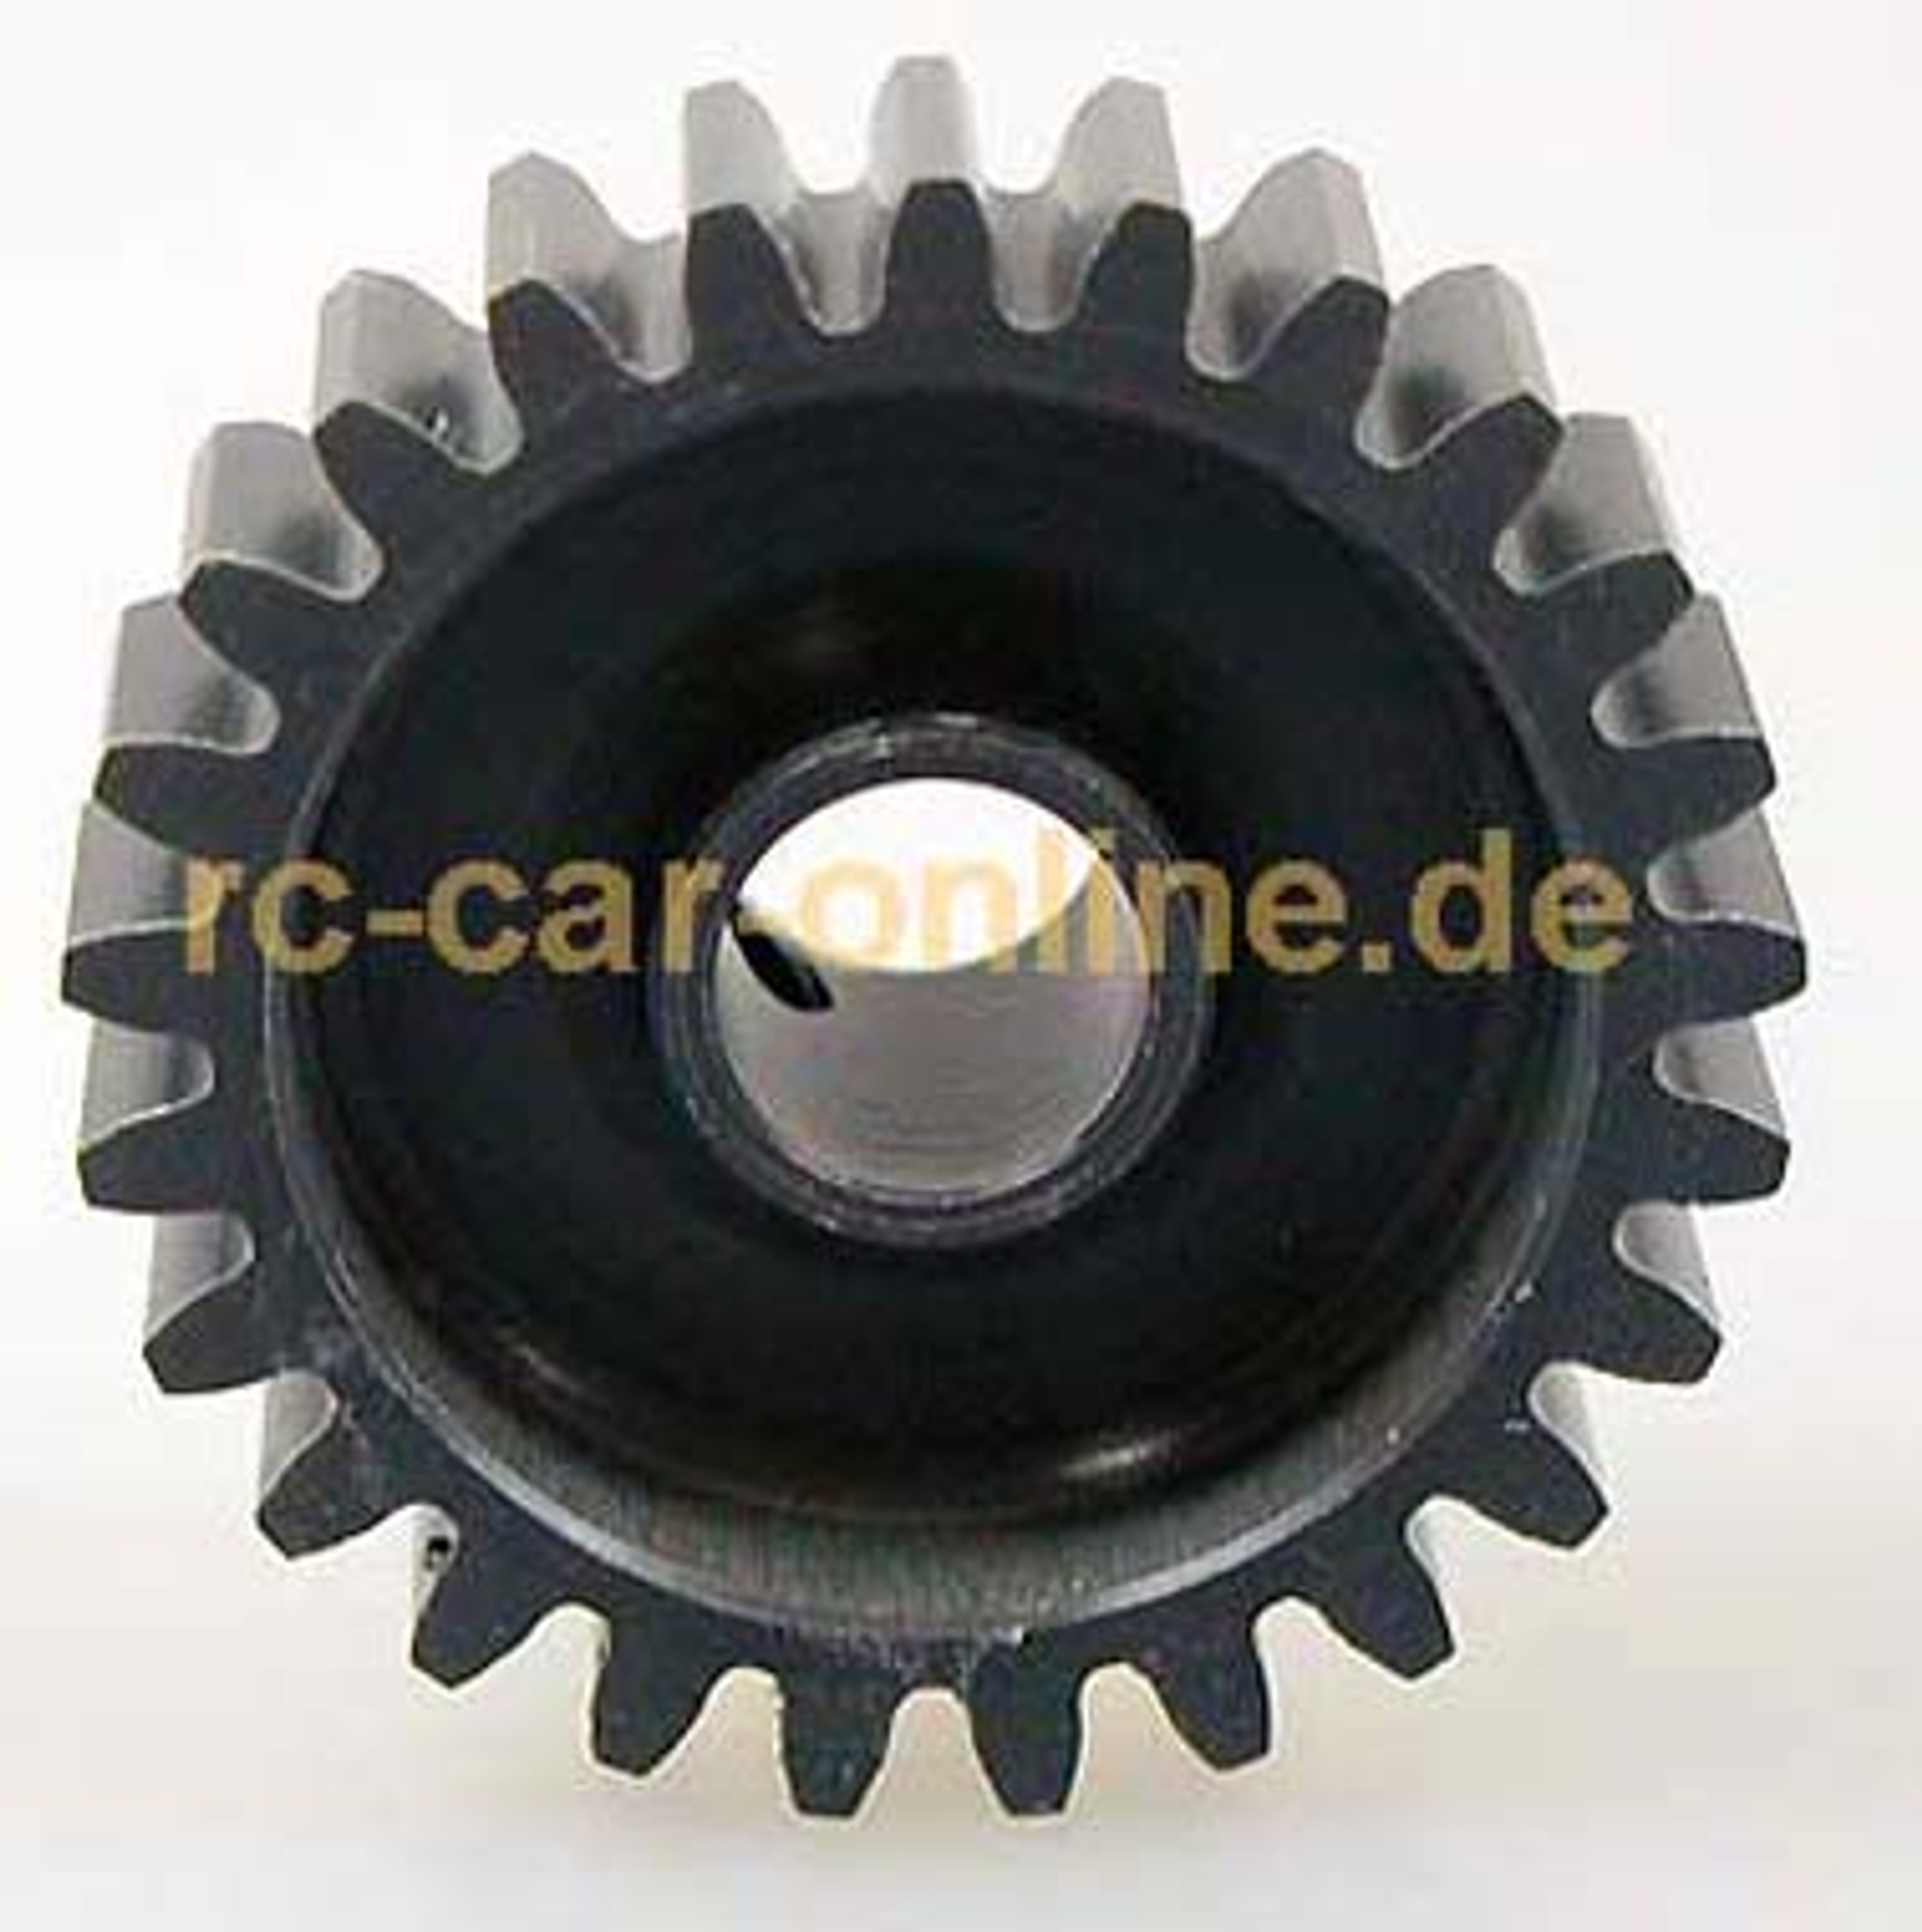 HT-Alloy pinion for Attack onroad use y0096, 1 pce.